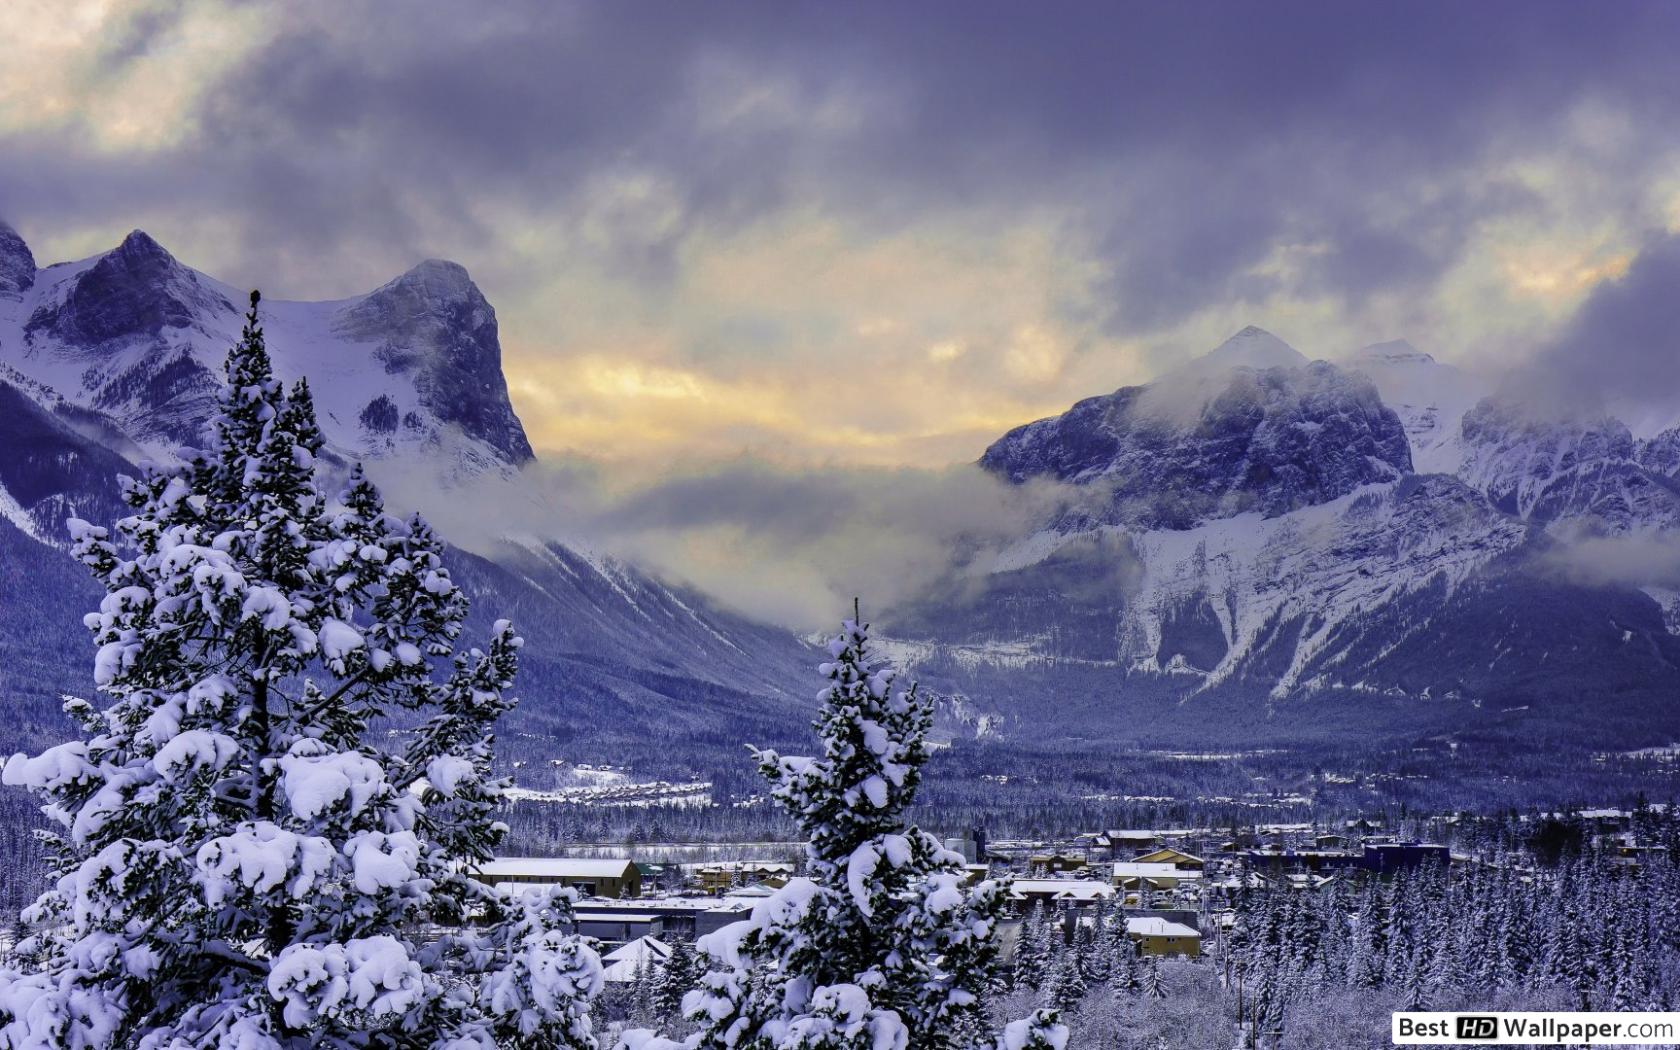 Winter in banff national park canada HD wallpaper download